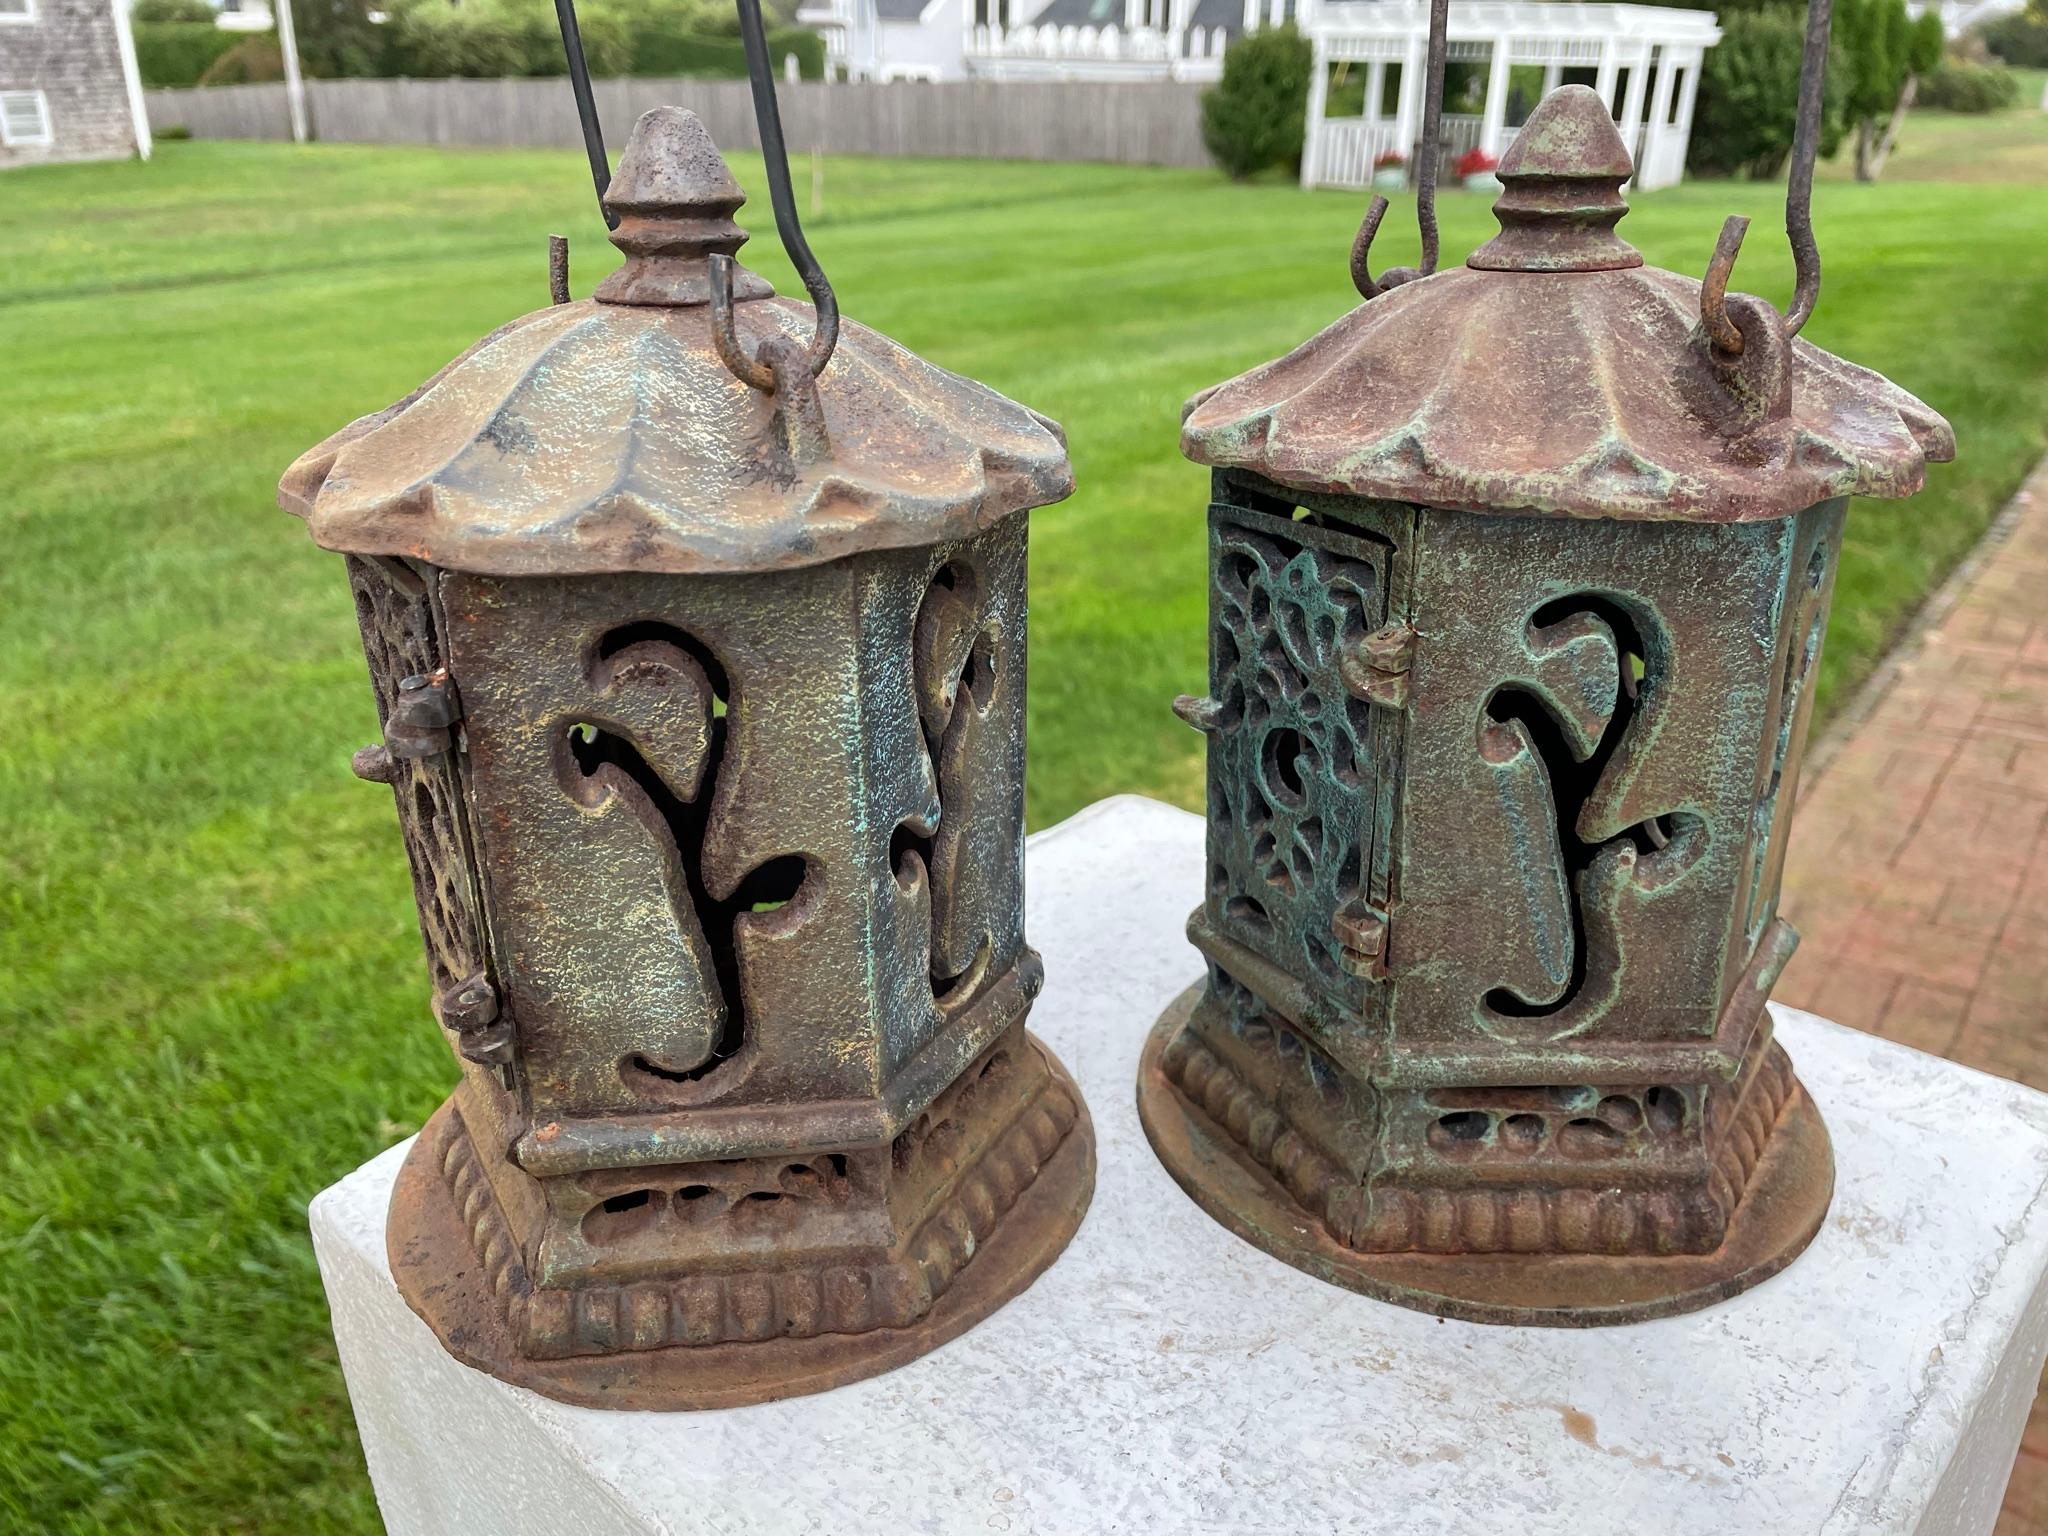 From our recent garden acquisitions in original condition

The first pair we've seen.

Pair (2) of rare heavy hand cast iron 